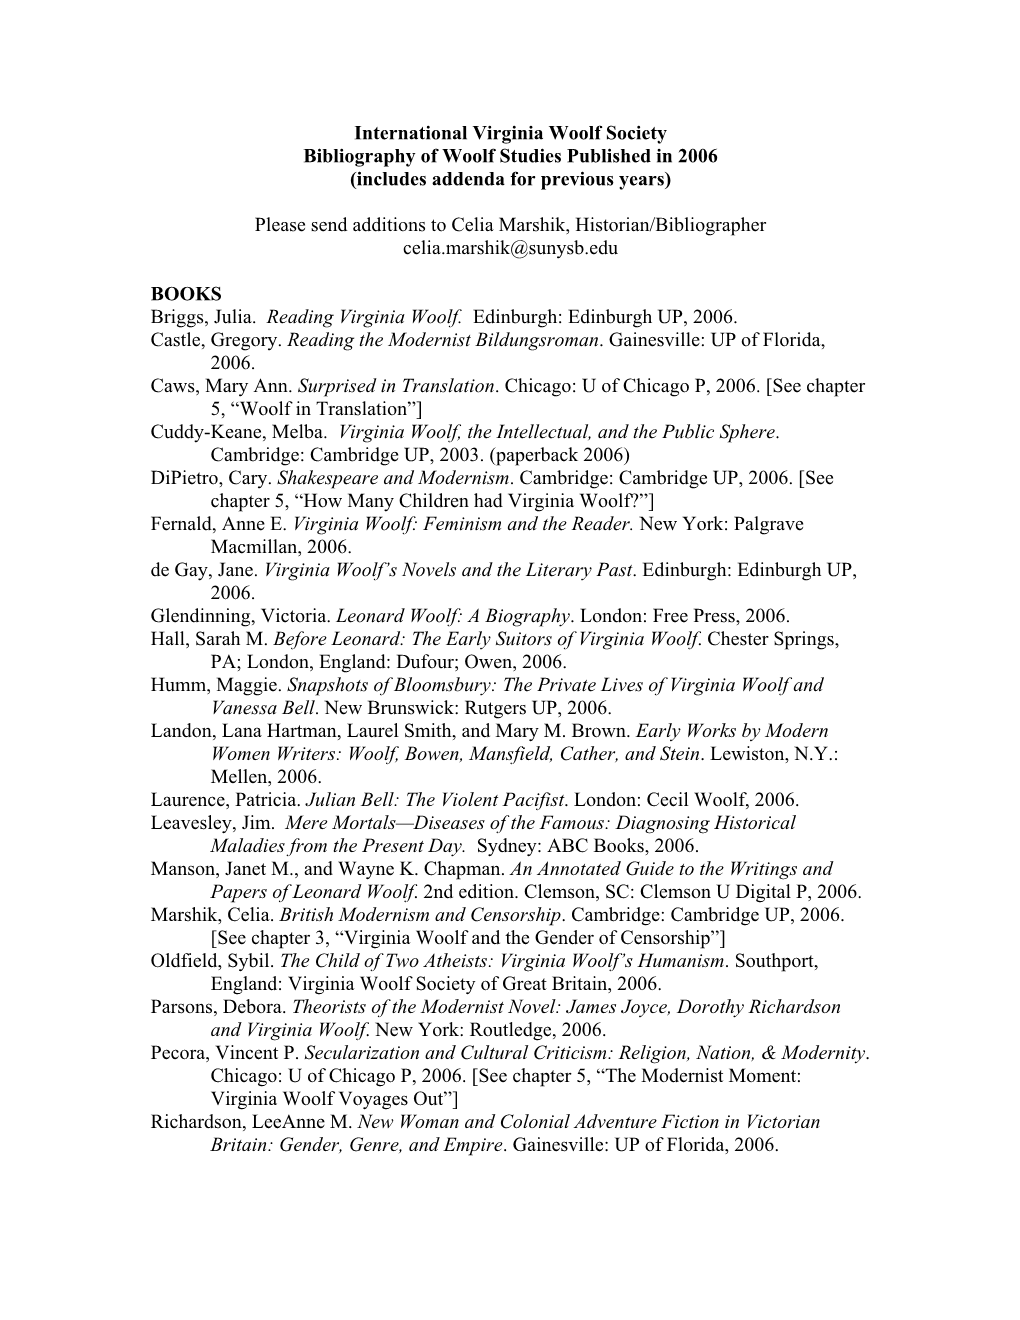 International Virginia Woolf Society Bibliography of Woolf Studies Published in 2006 (Includes Addenda for Previous Years)